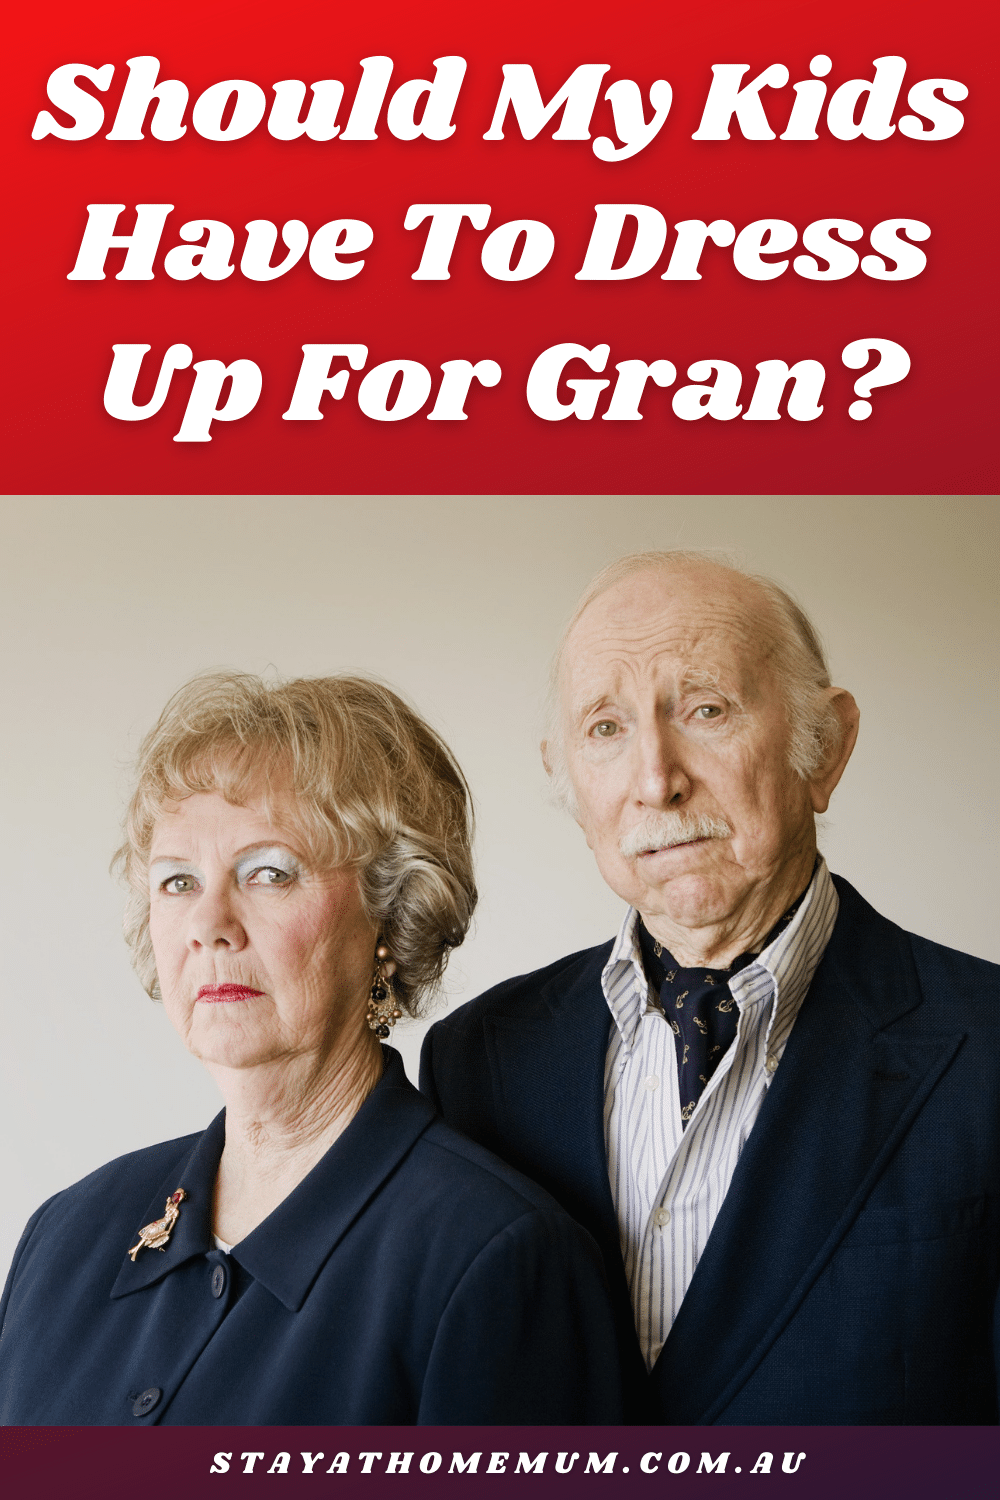 Should My Kids Have To Dress Up For Gran 1 | Stay at Home Mum.com.au